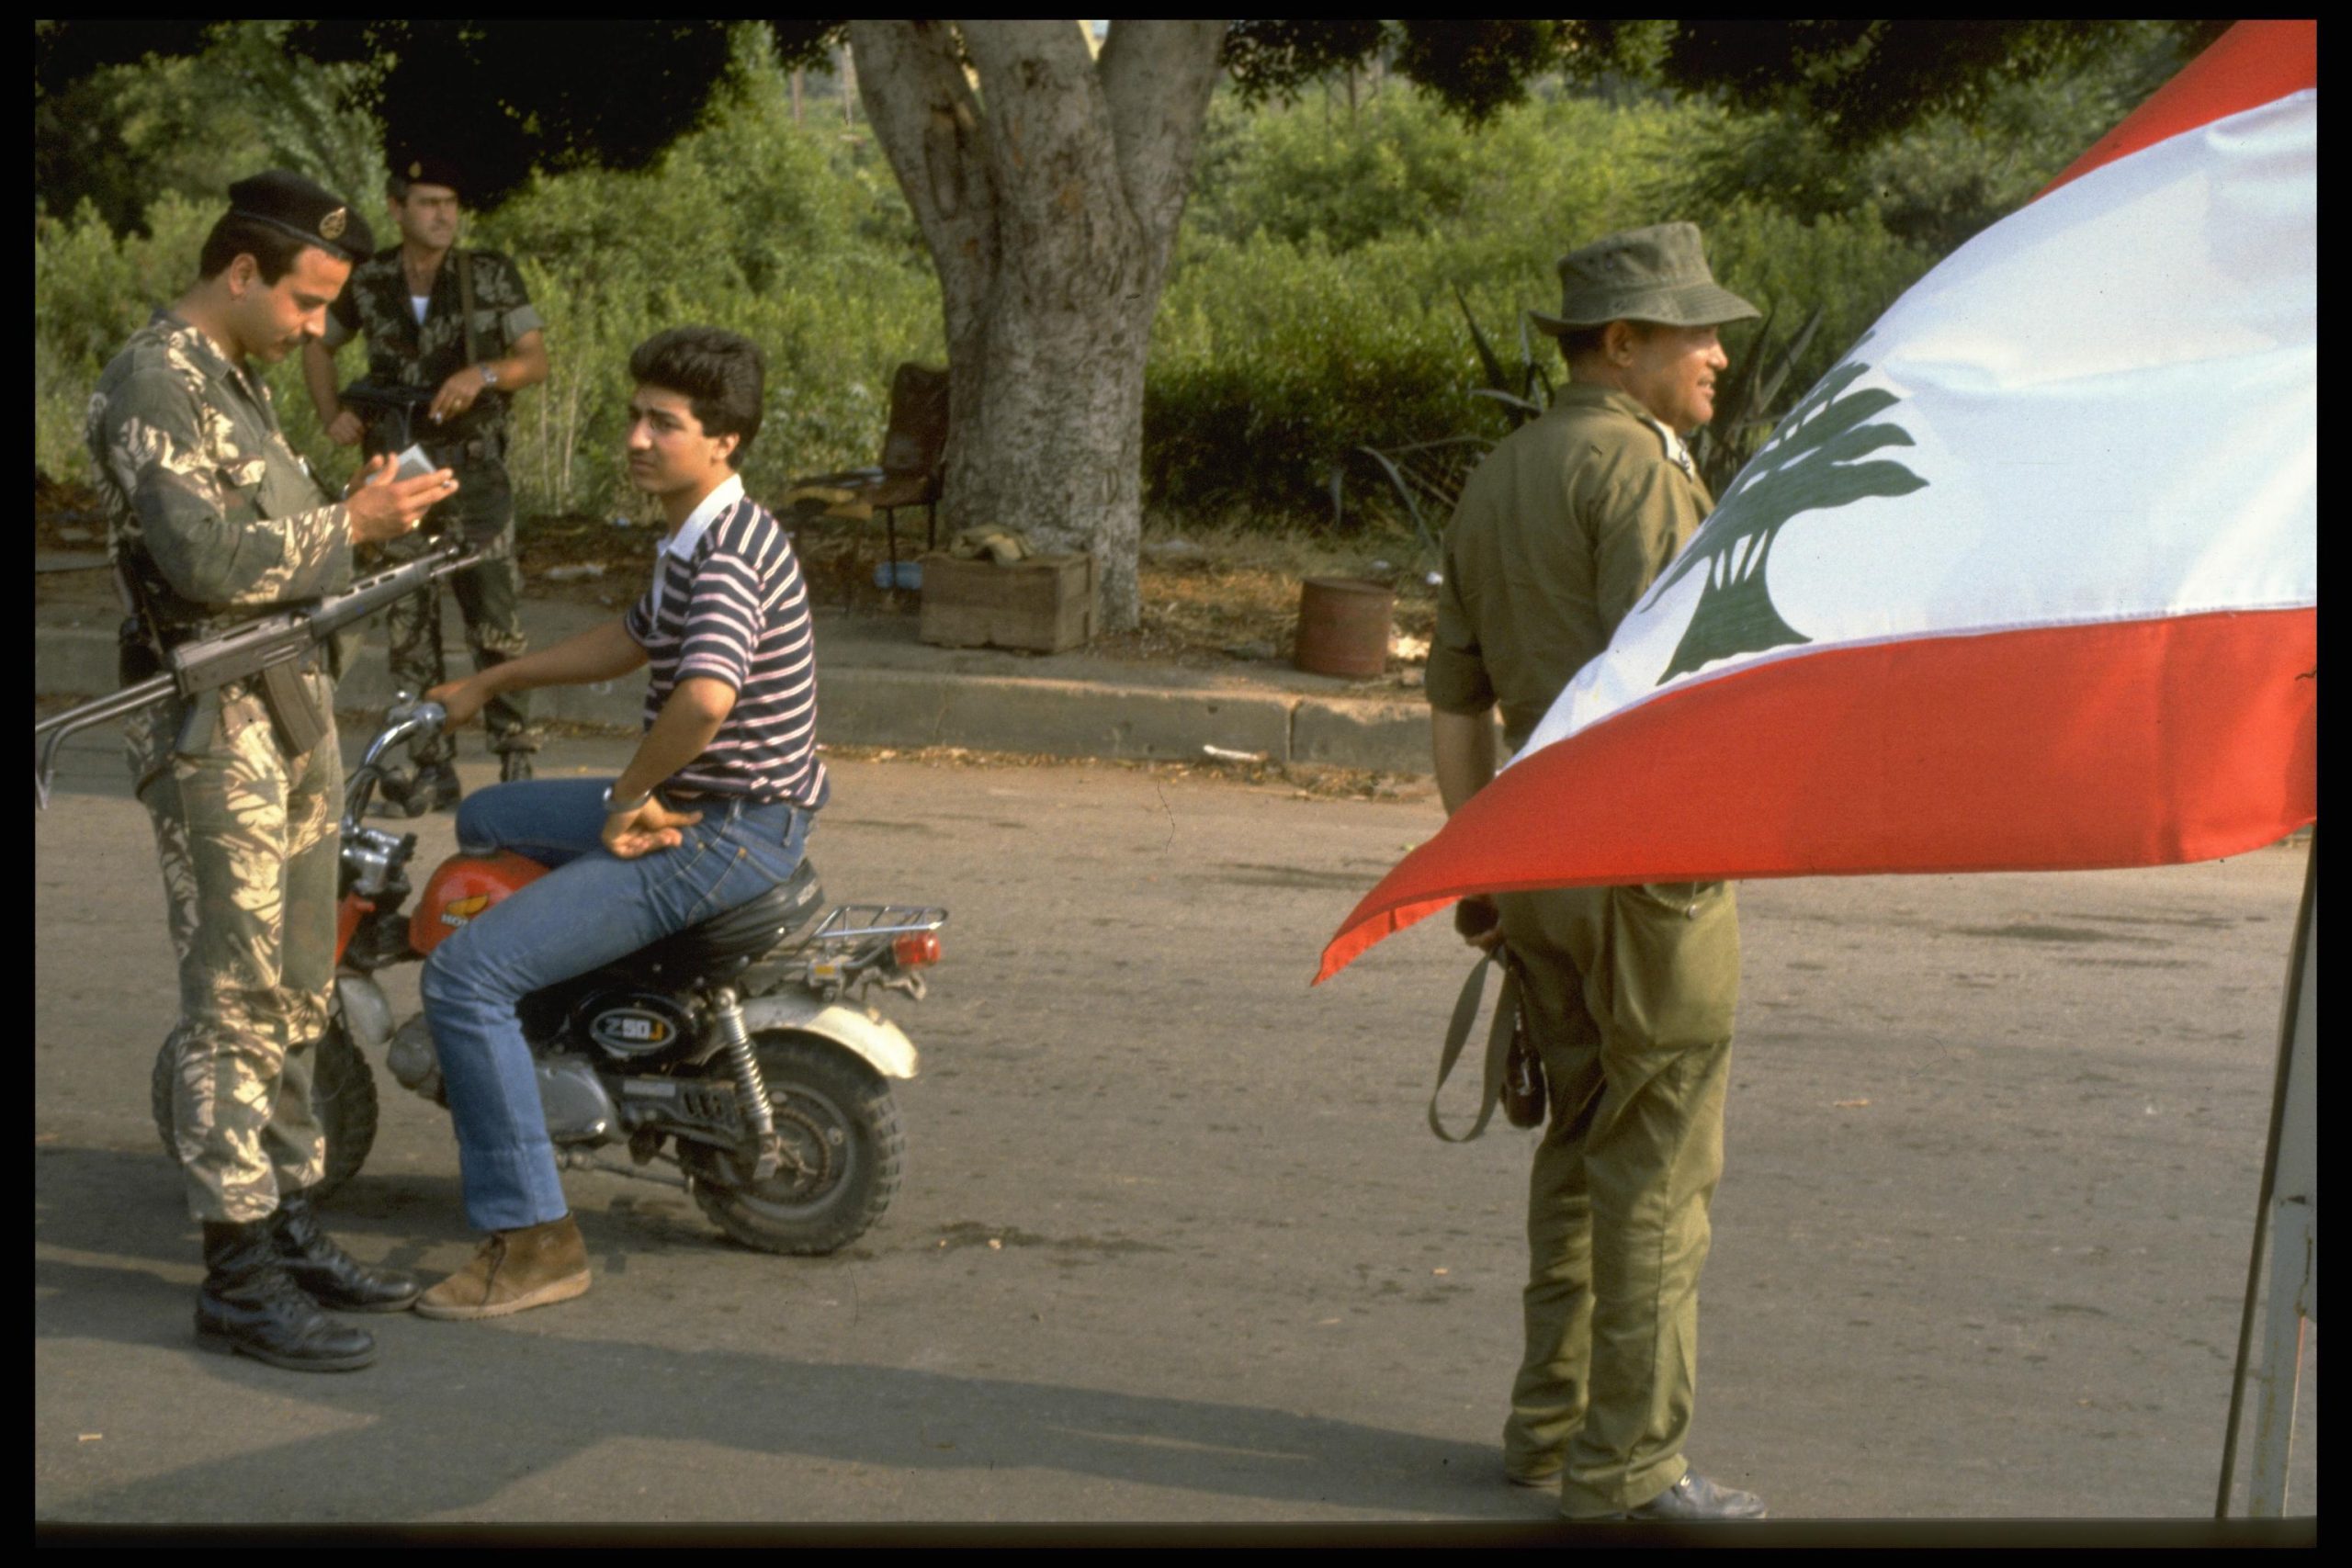 An IDF soldier searching a Lebanese citizen with a Christian militia member.